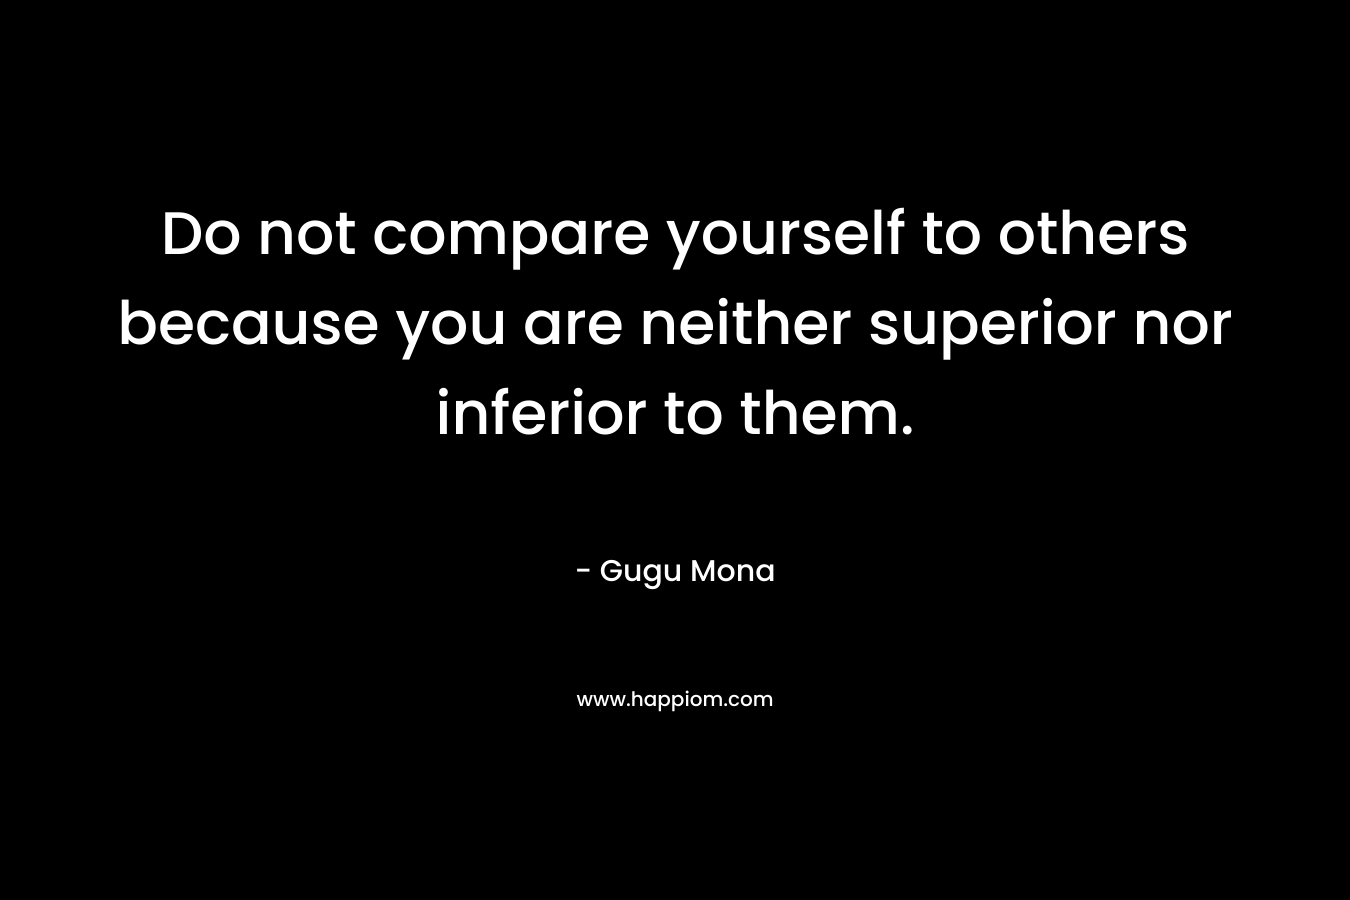 Do not compare yourself to others because you are neither superior nor inferior to them.